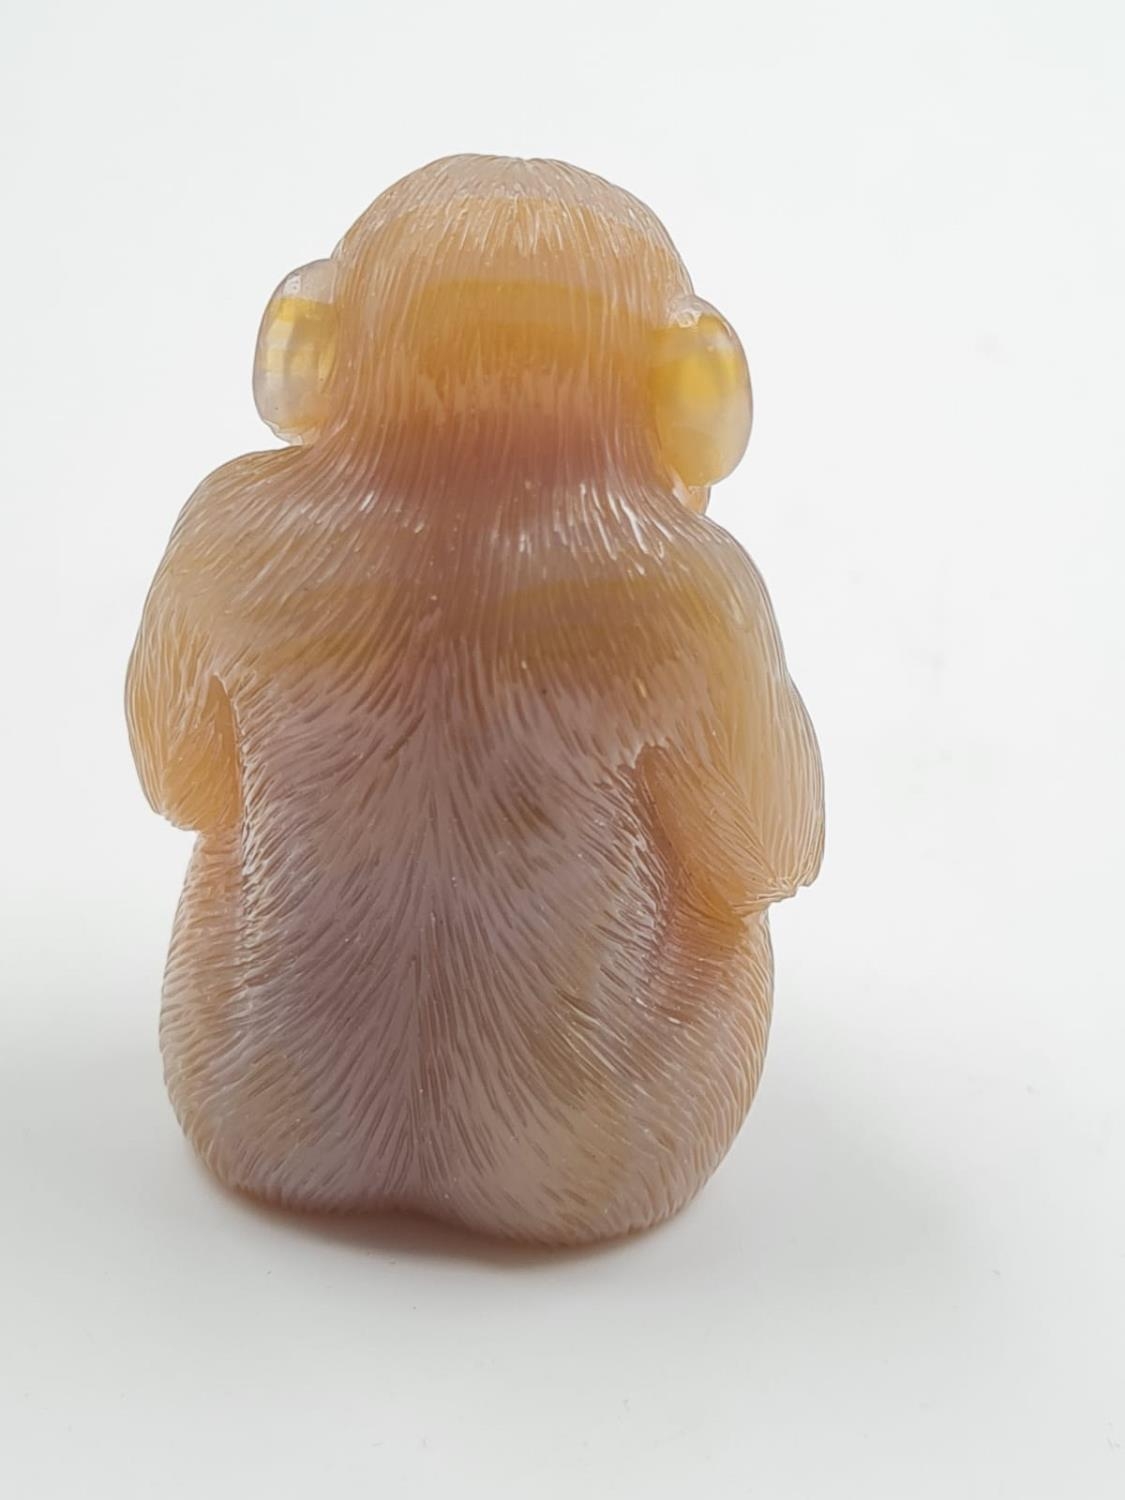 A LATE 19TH CENTURY RUSSIAN MONKEY FIGURE IN AGATE WITH DIAMOND EYES SET IN 14CT GOLD, 6 CMS TALL - Image 3 of 6